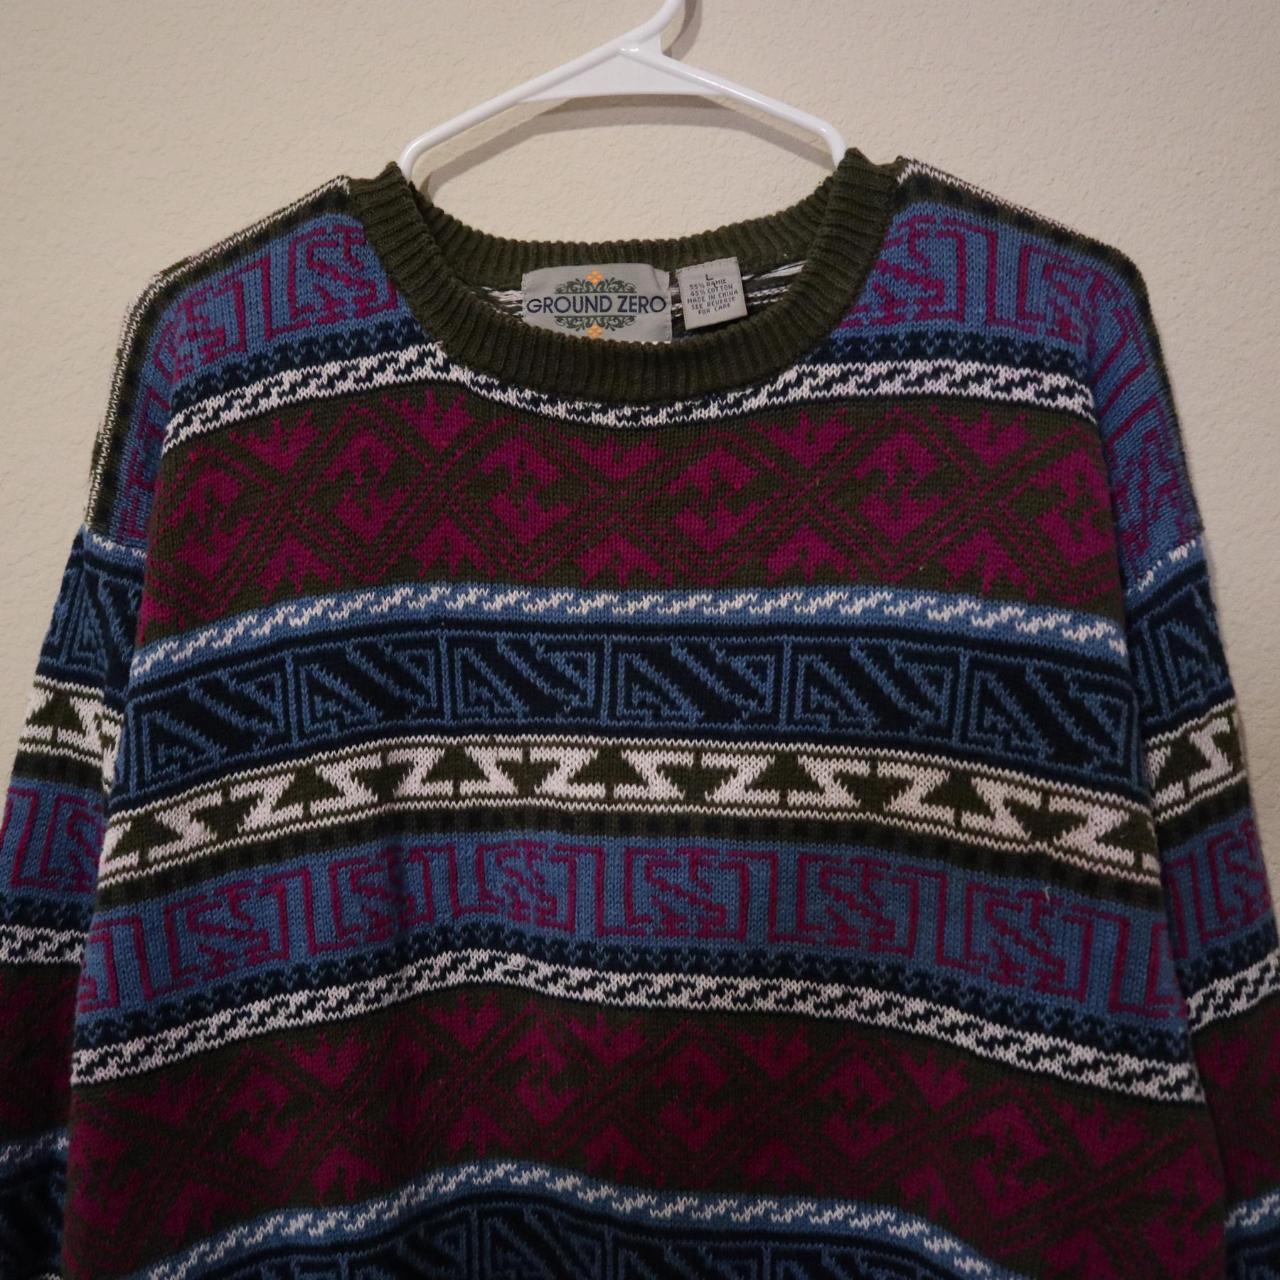 Product Image 2 - 90s Colorful Geometric Pullover Sweater
Size